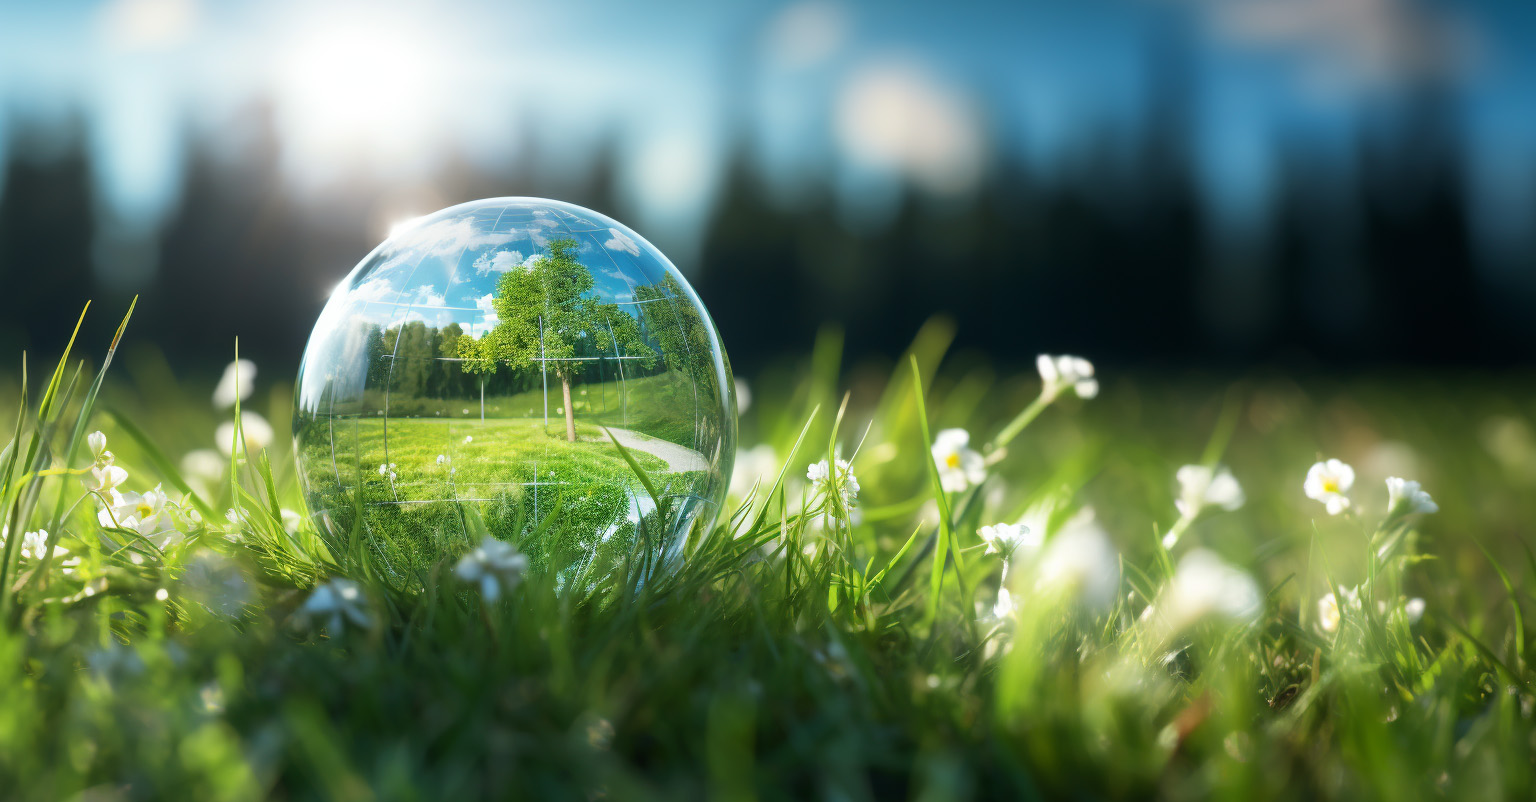 planet-earth-crystal-ball-green-grass-field-environ-production